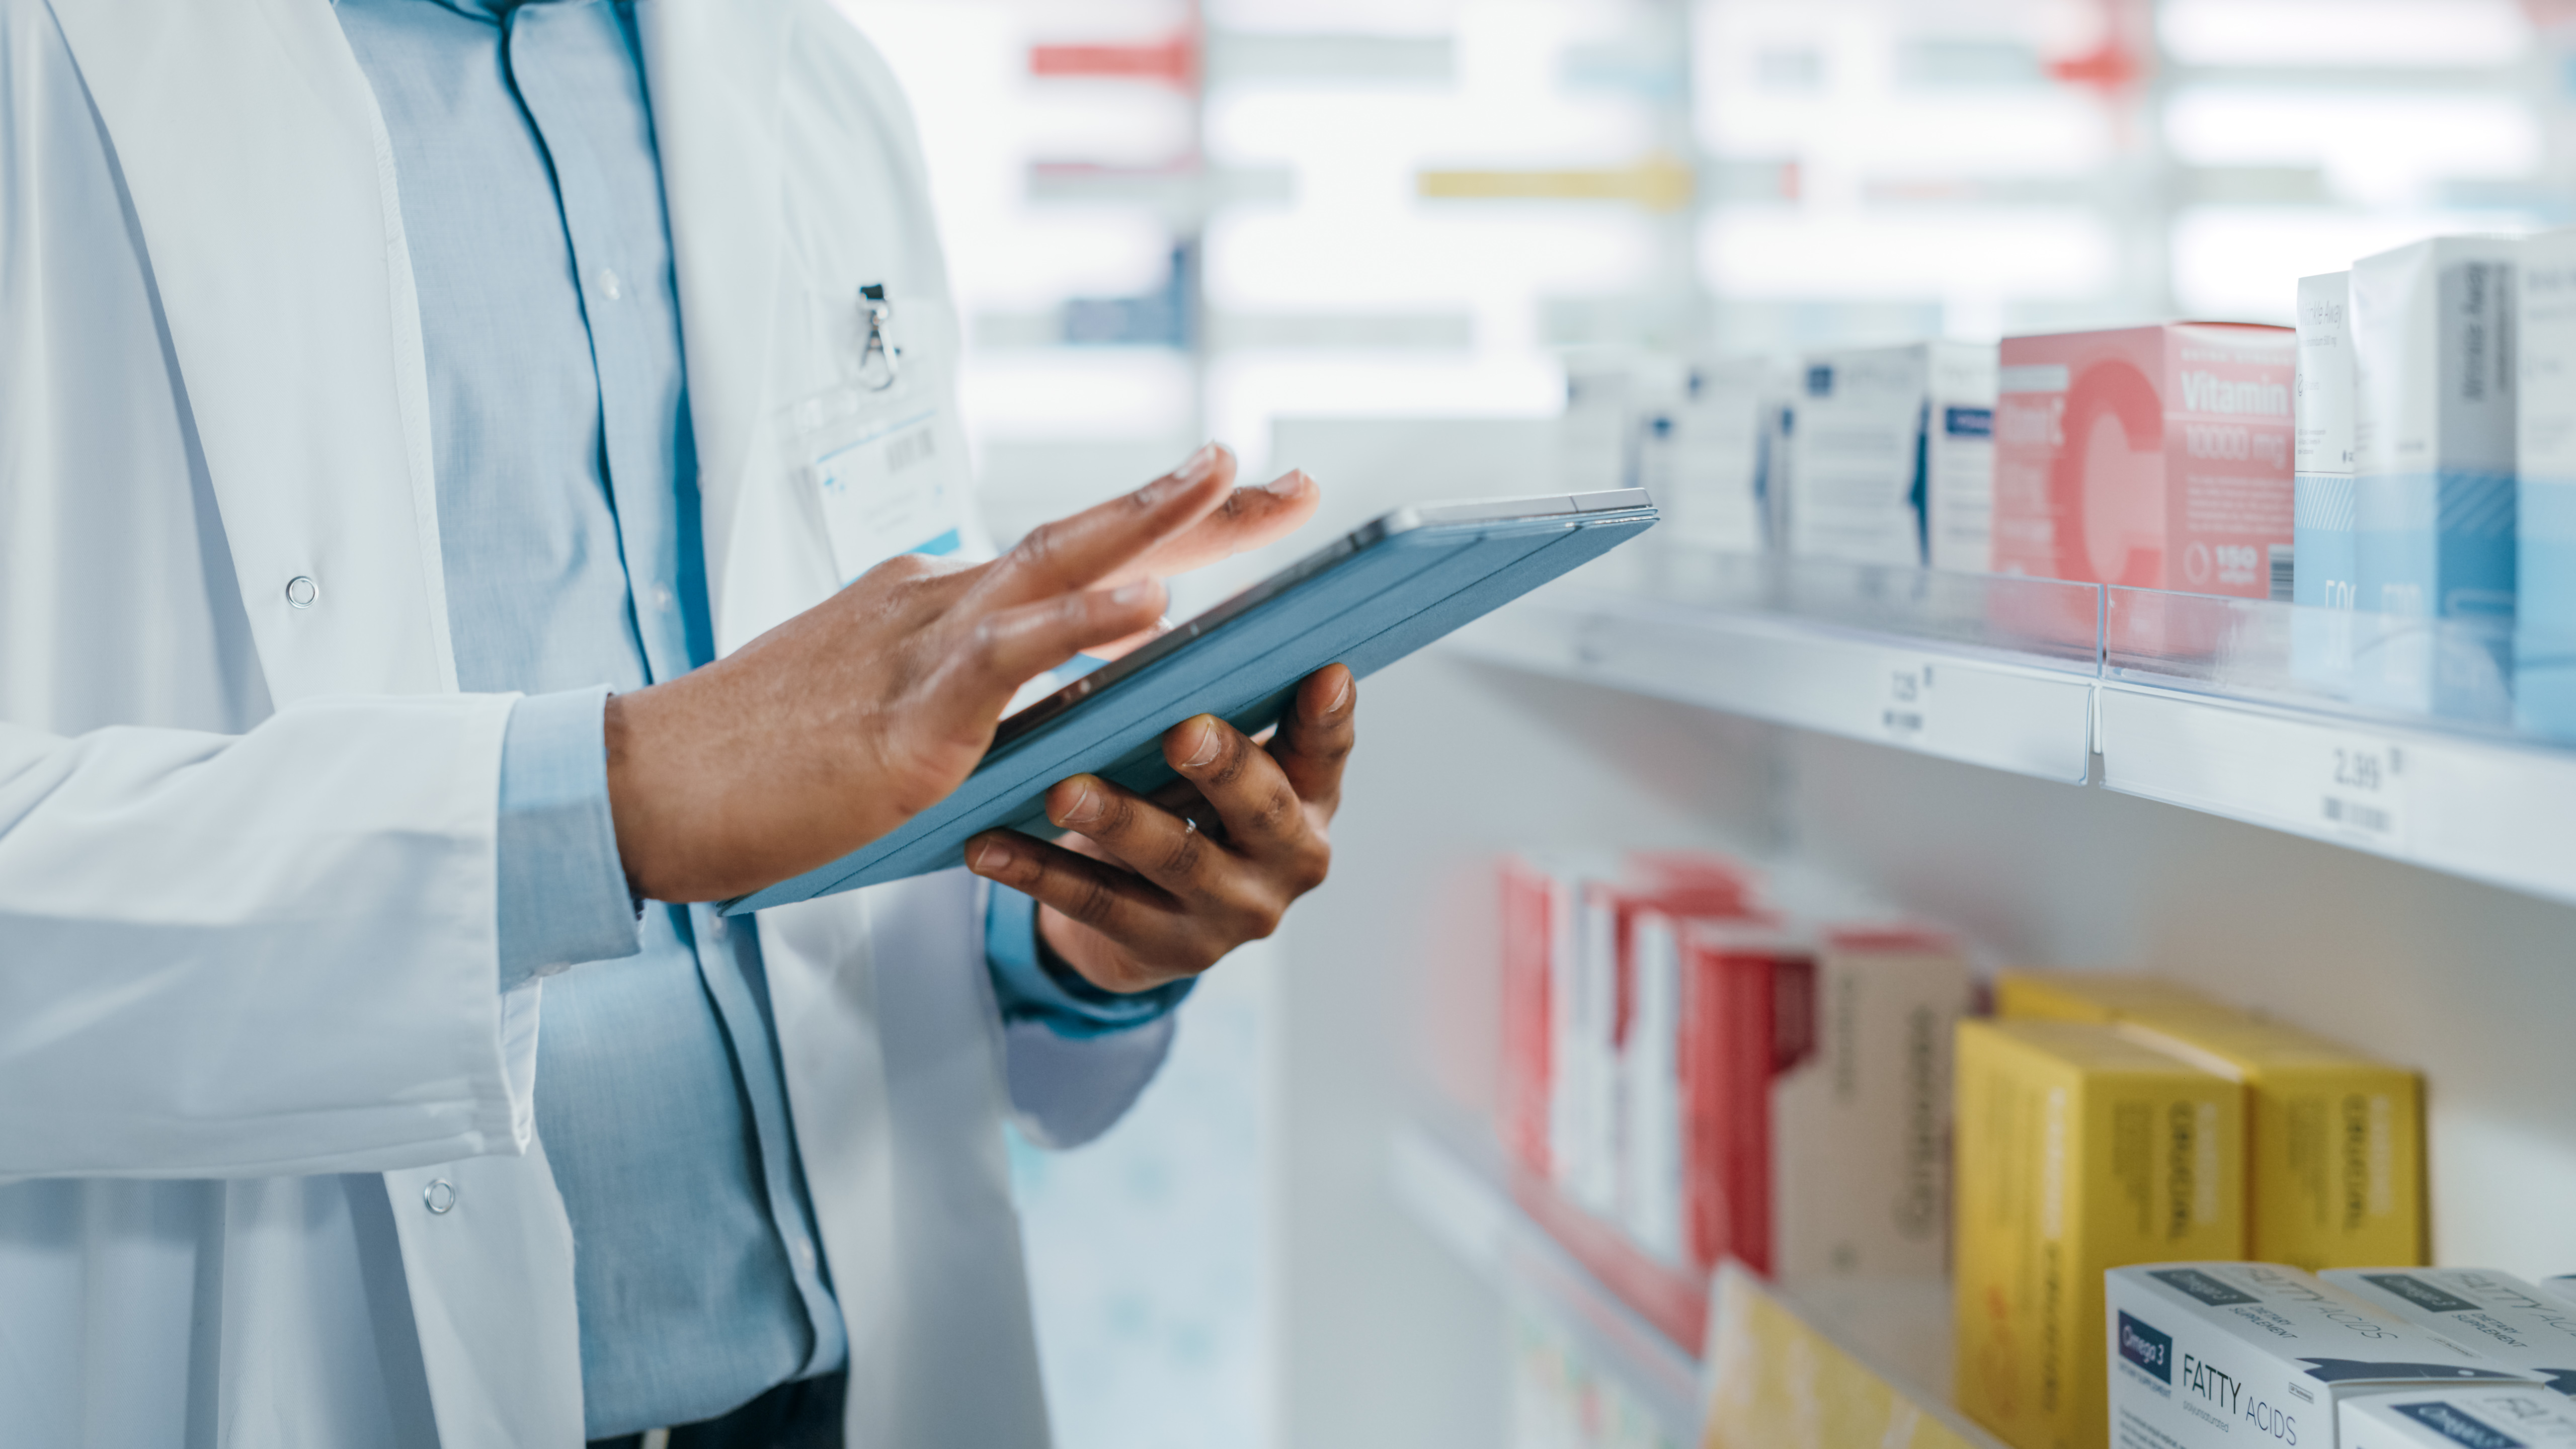 A pharmacist stands in front of shelves of medication and refers to a tablet.